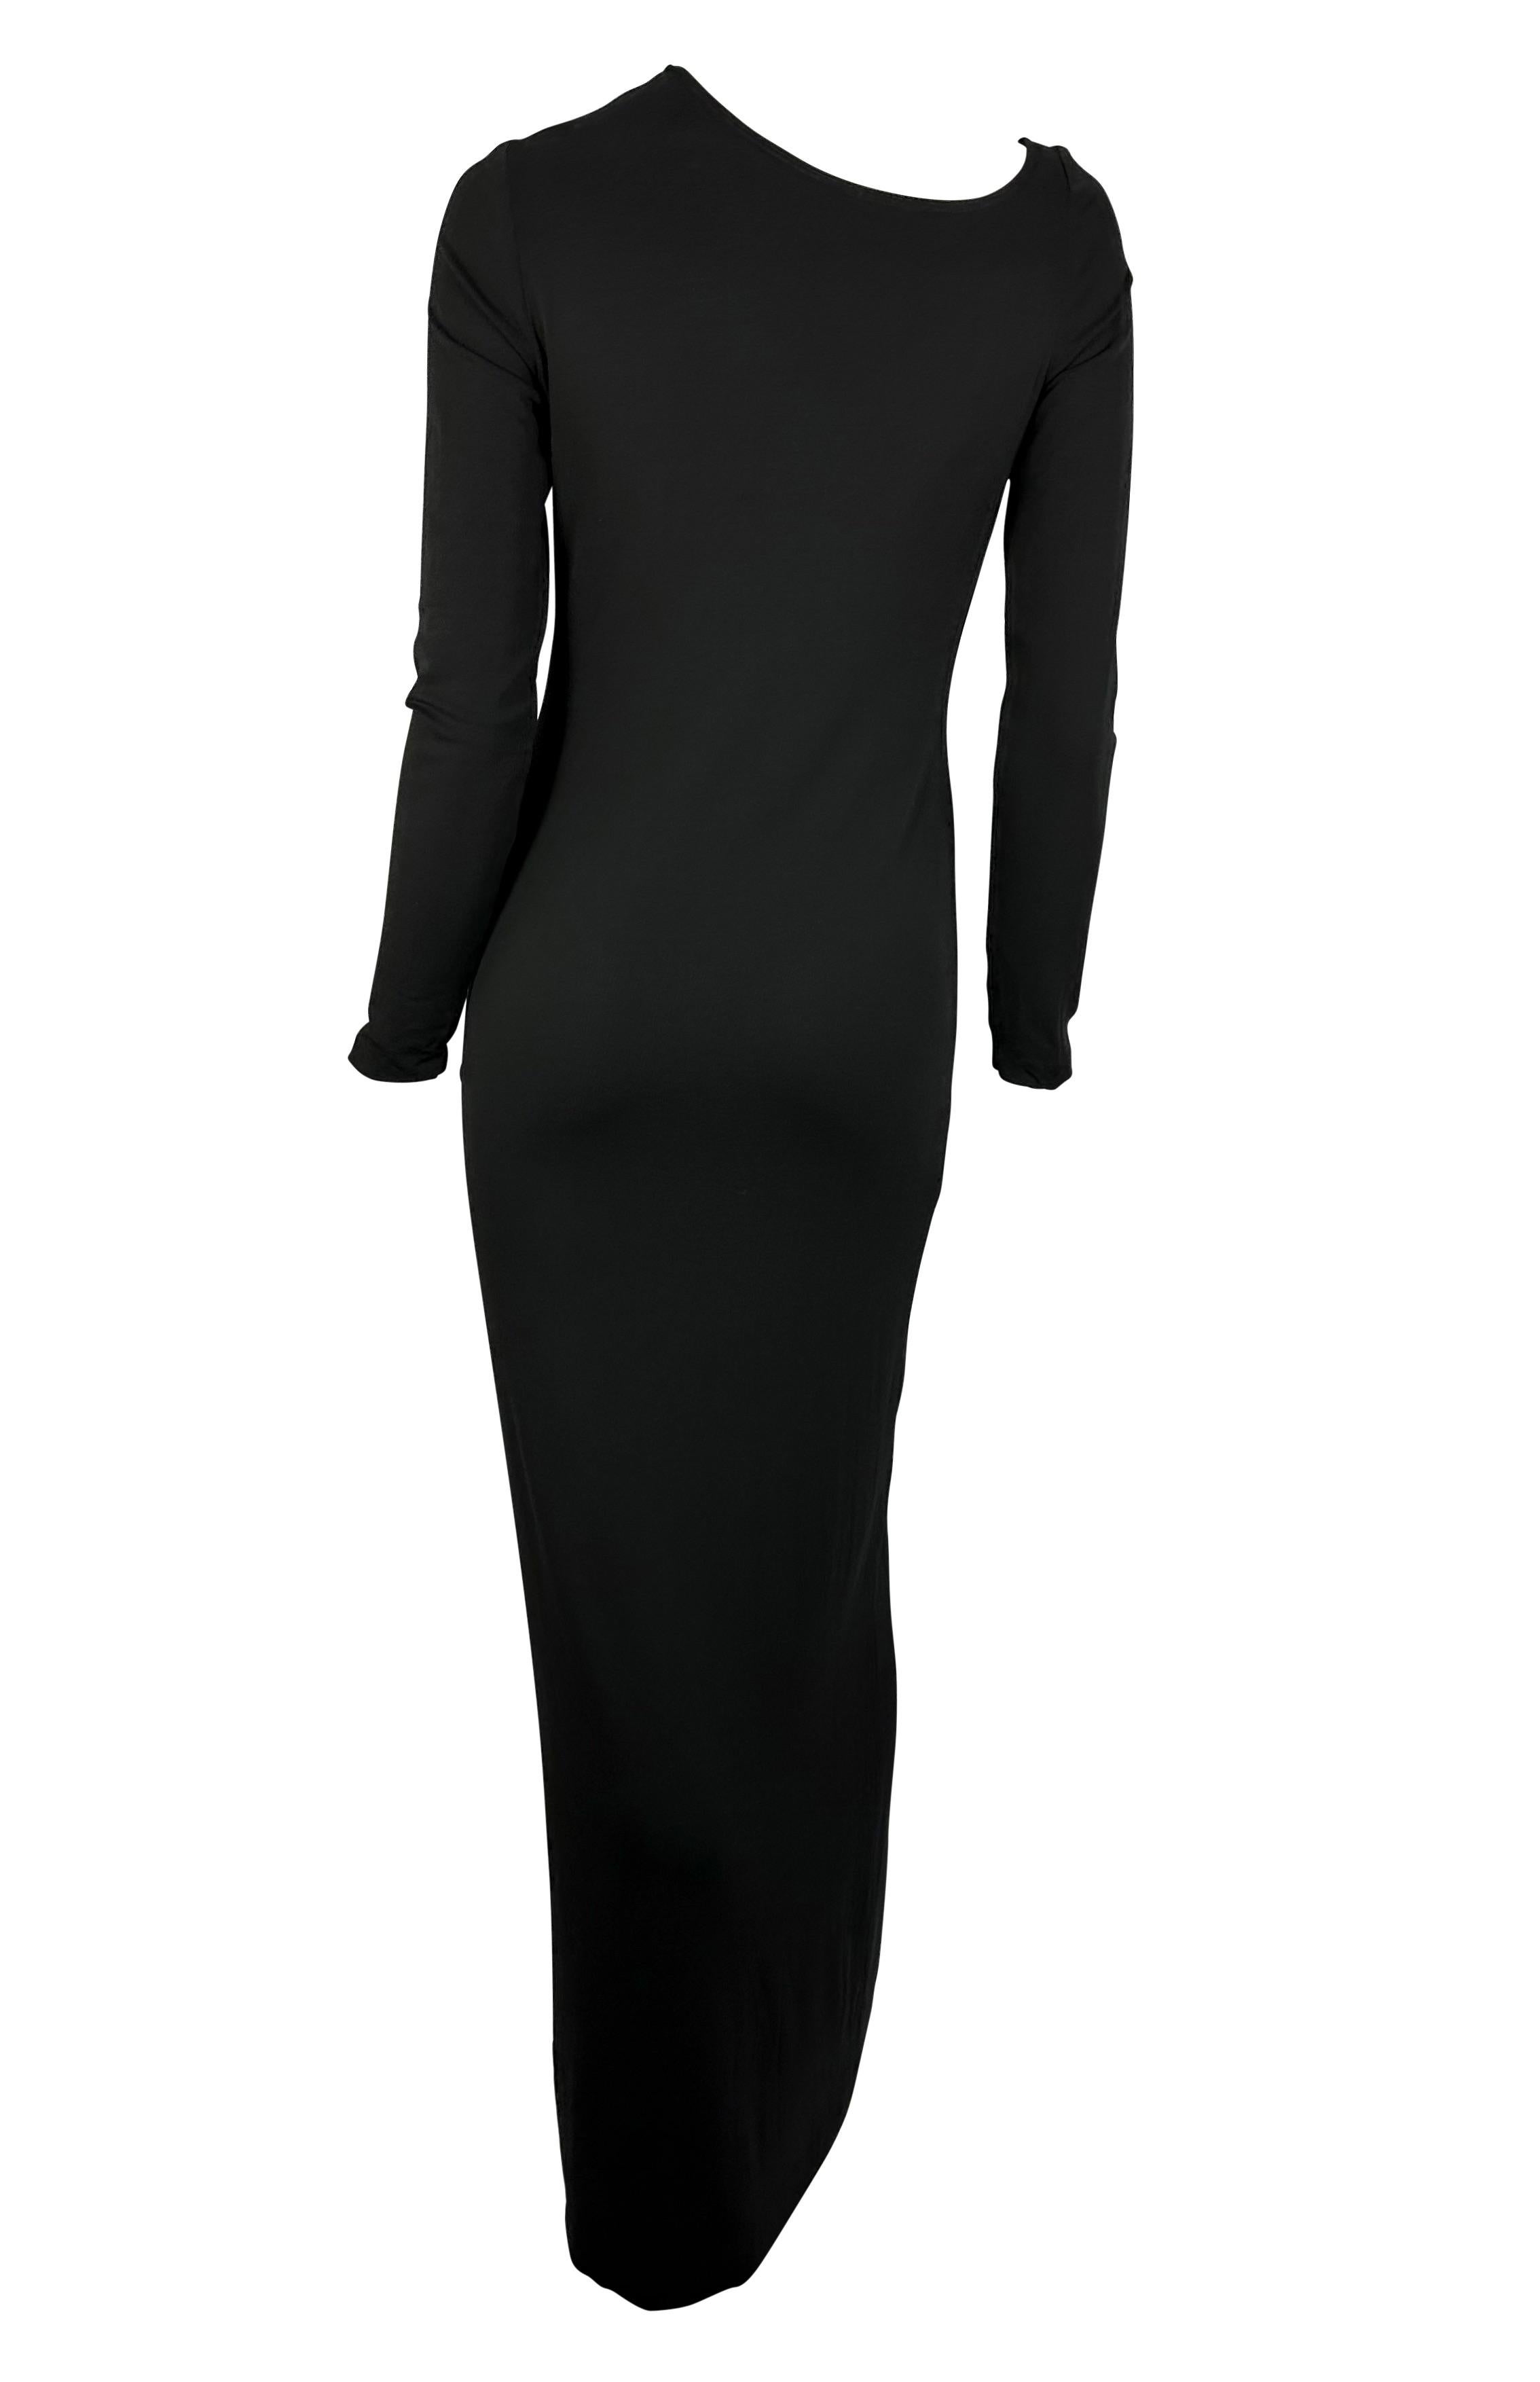 Women's NWT S/S 1998 Gucci by Tom Ford Asymmetric Neckline Black Jersey Stretch Gown For Sale